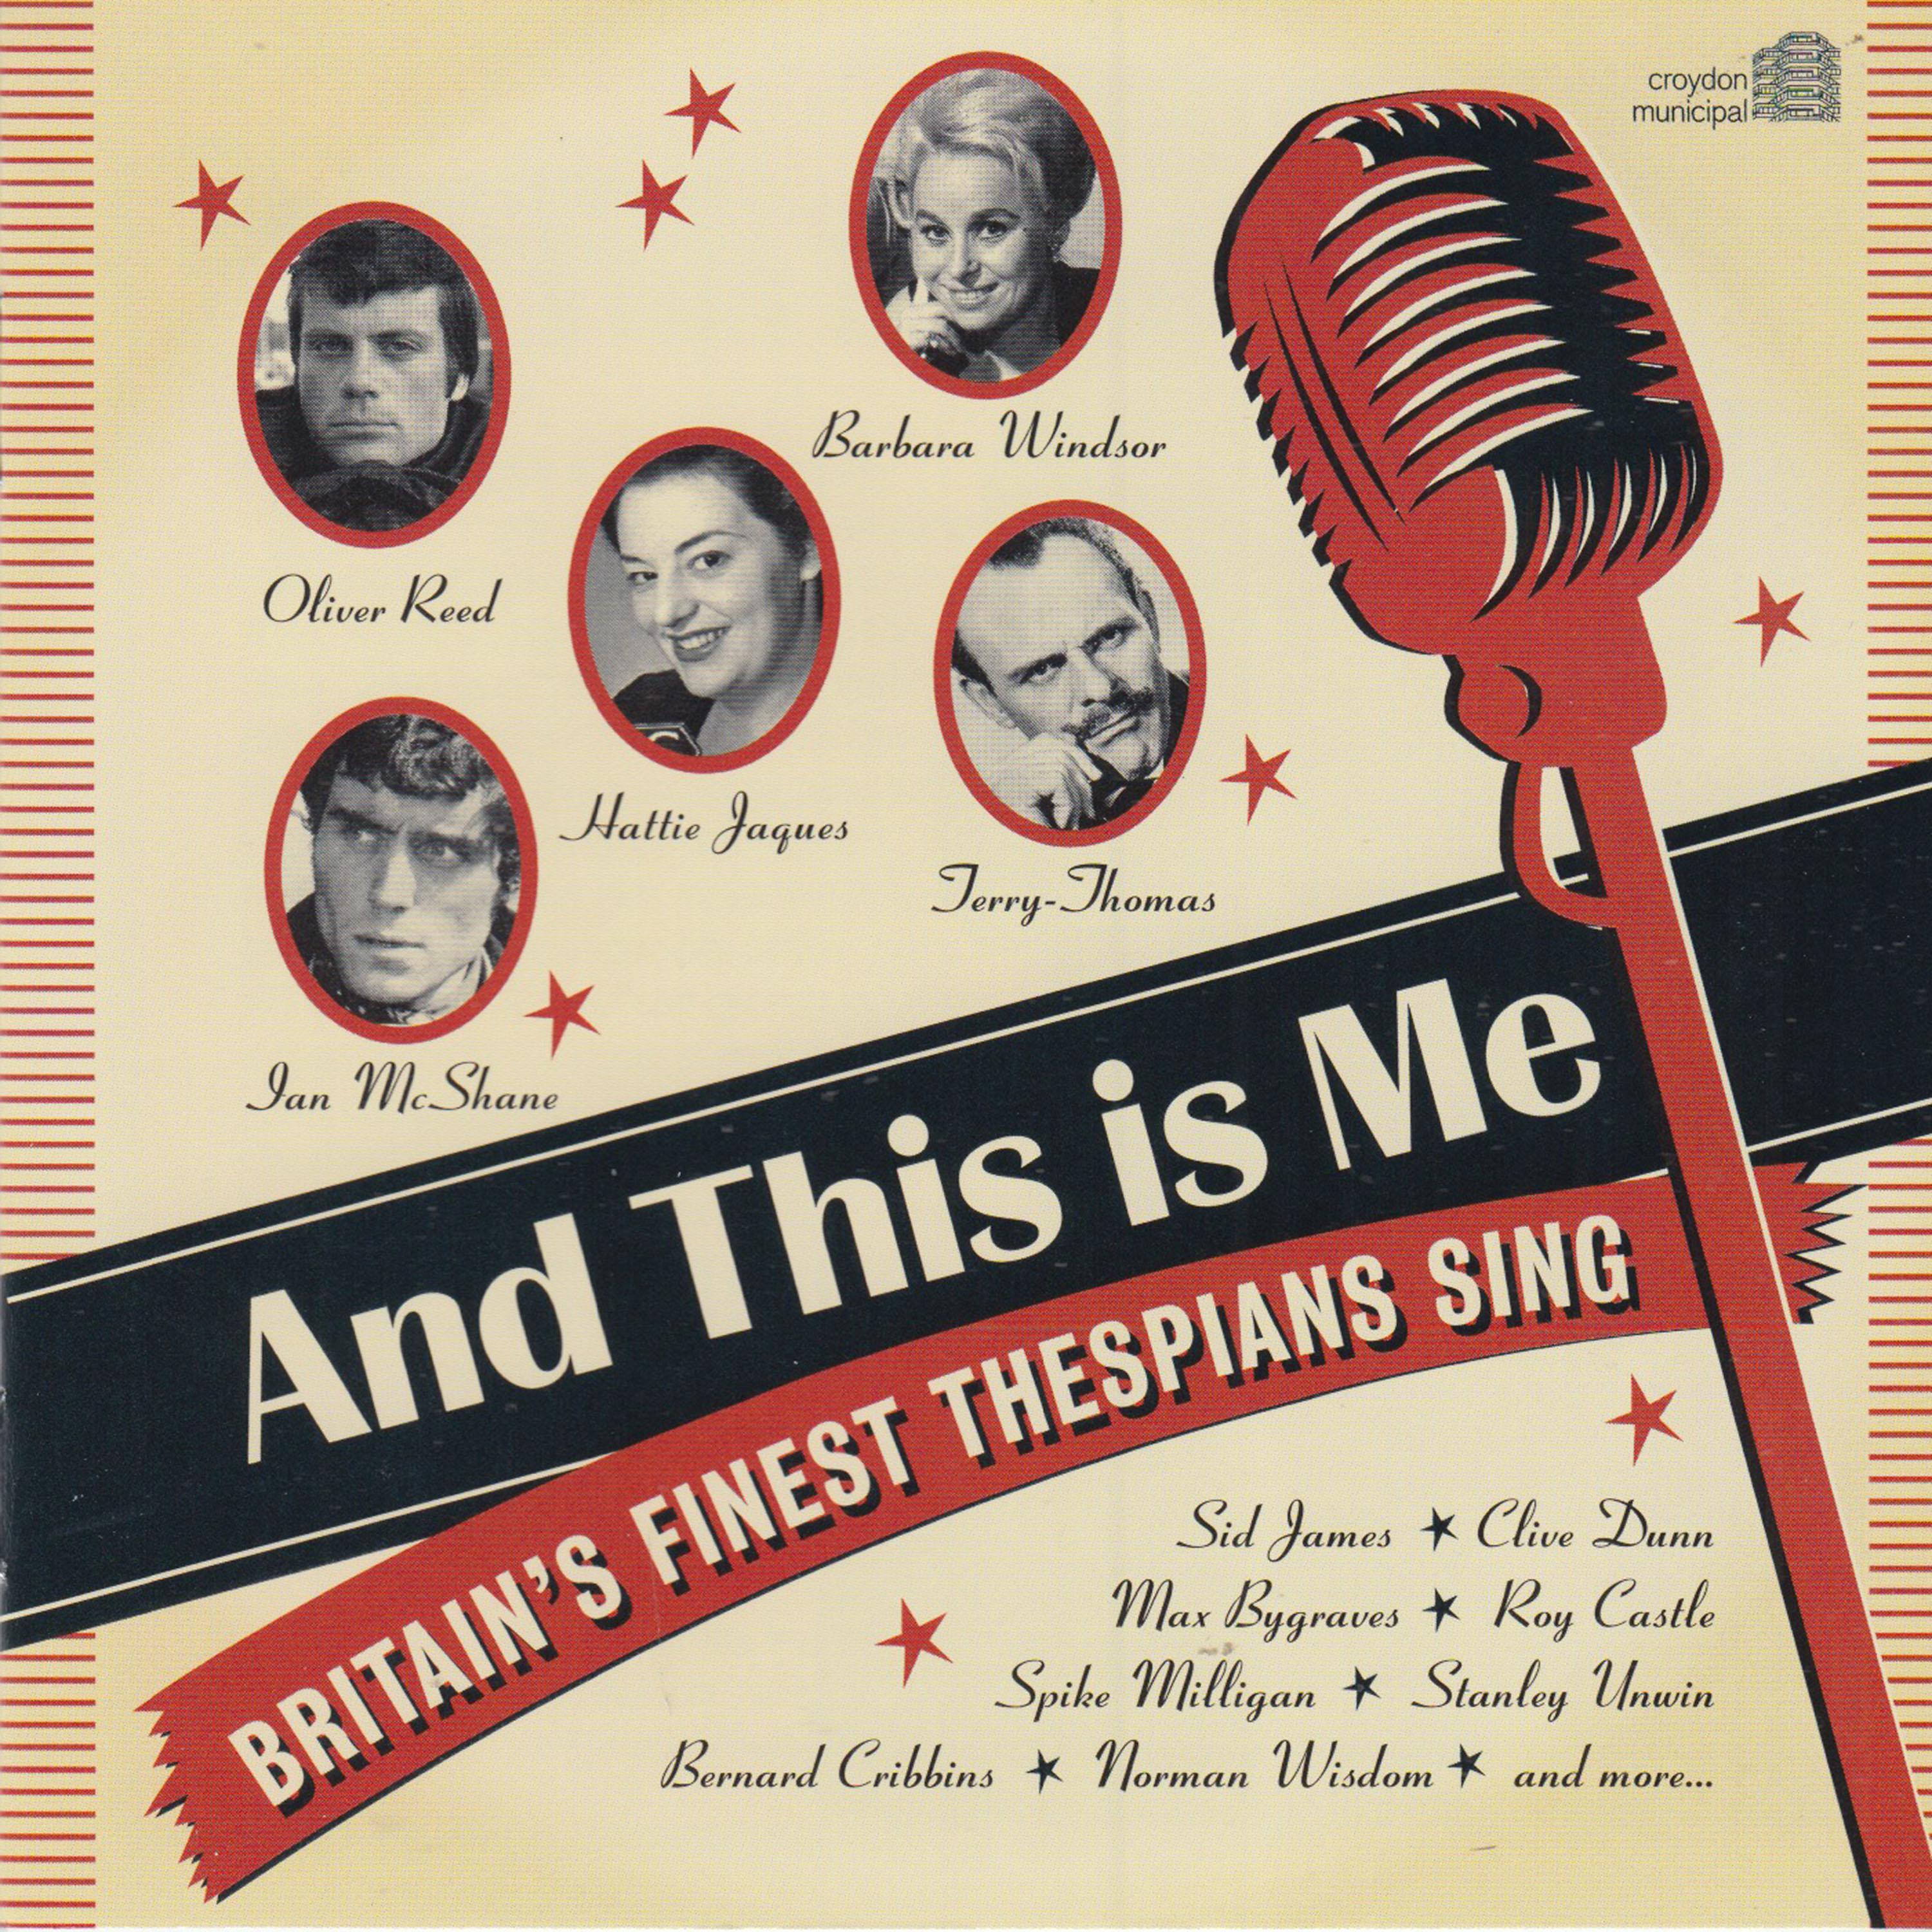 Постер альбома And This Is Me: Britan's Finest Thespians Sing